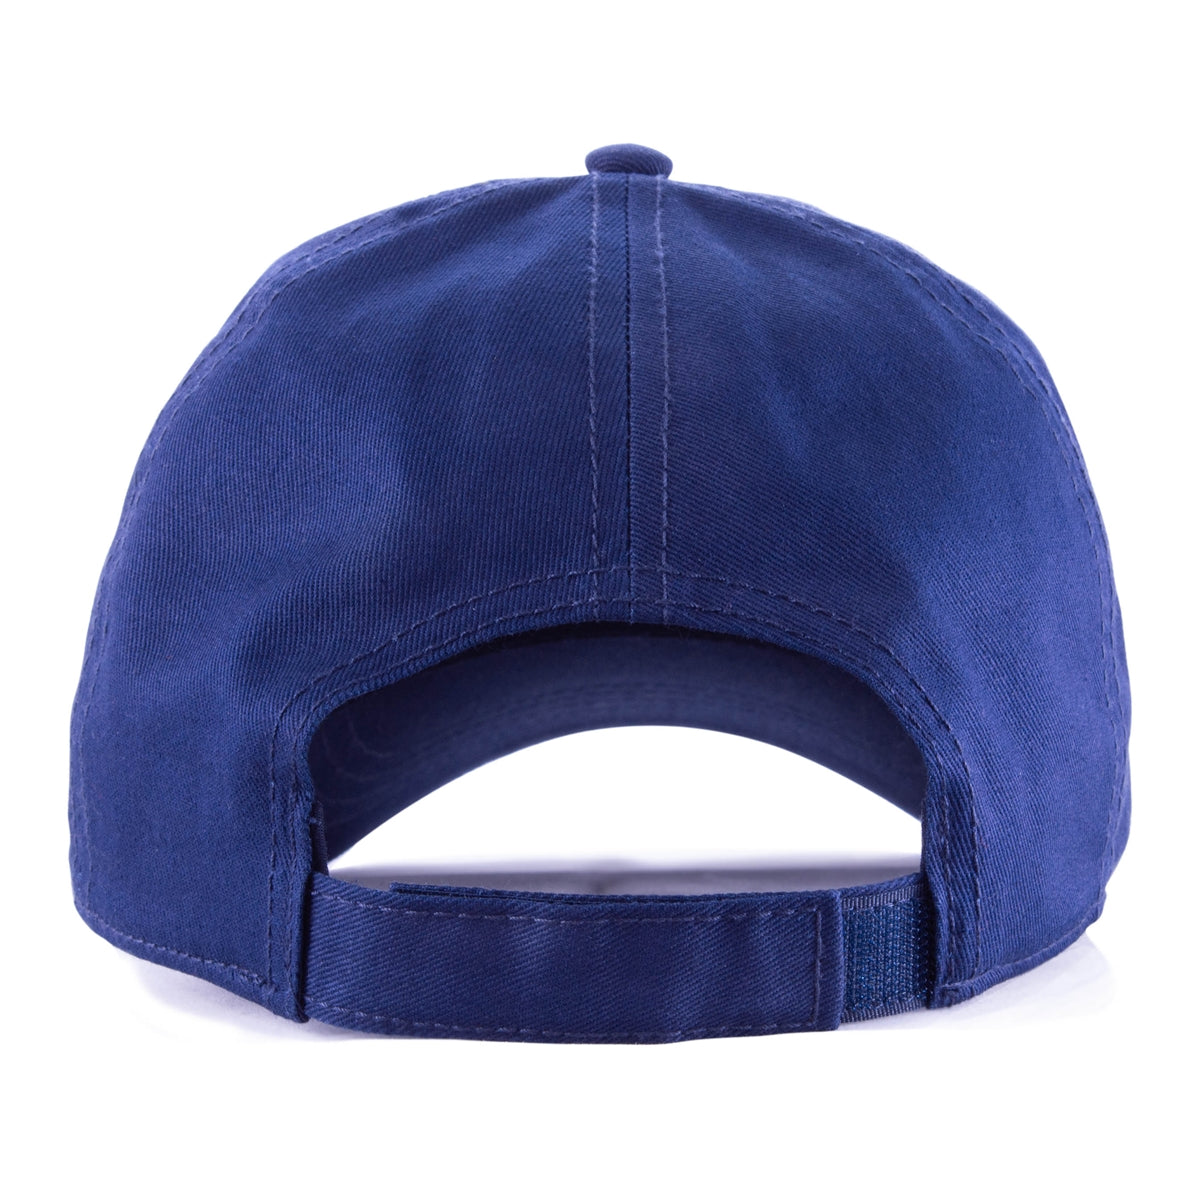 Blue baseball cap with blue The Presidio San Francisco words embroidered on front panels.